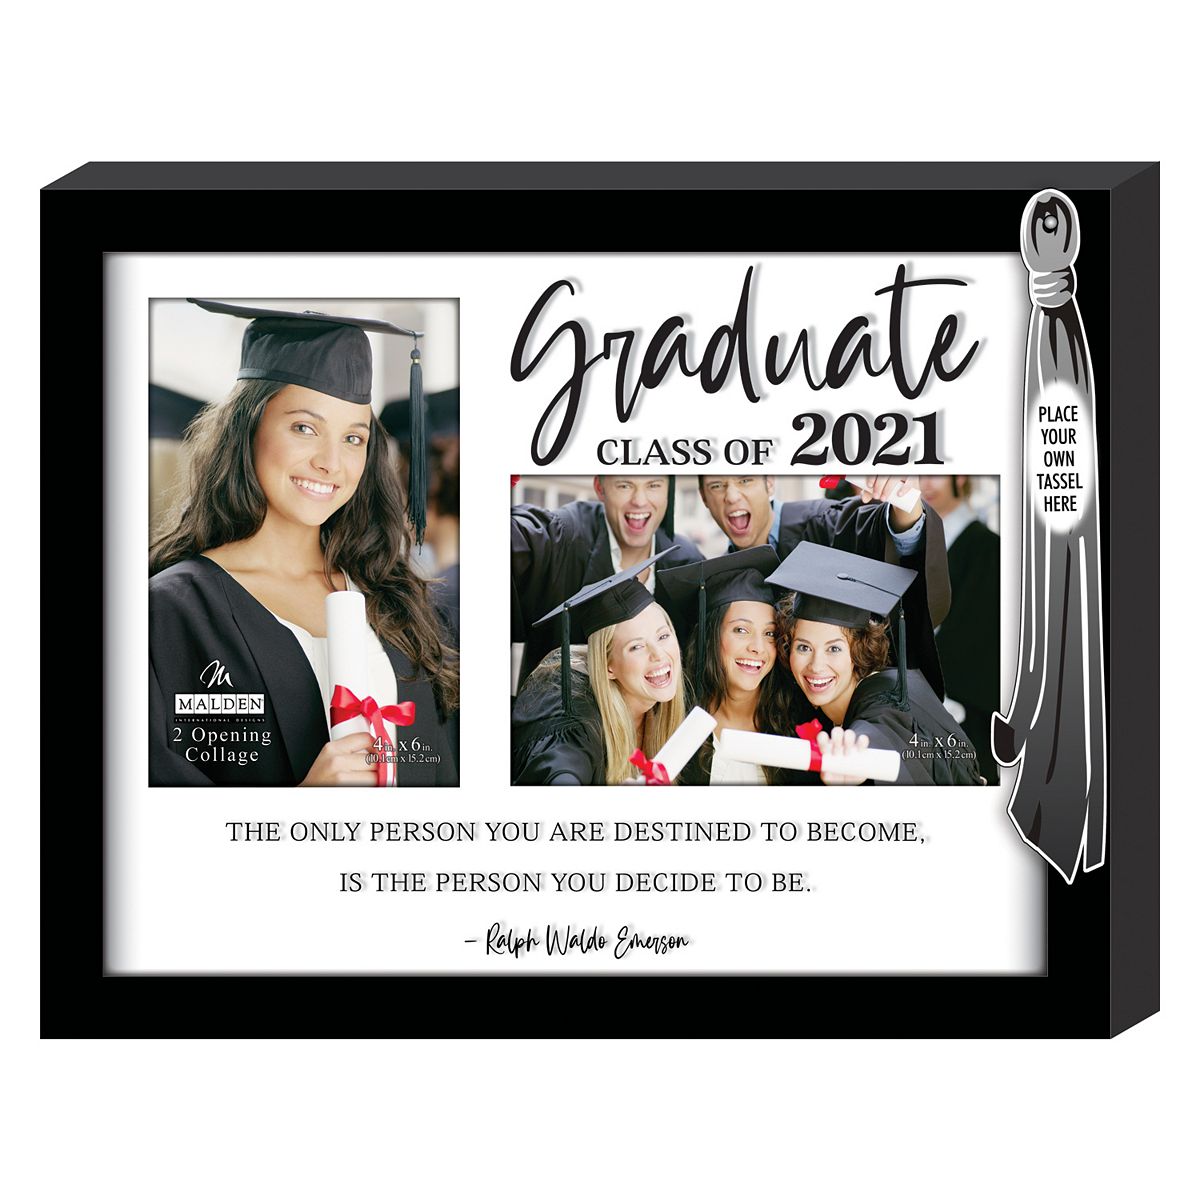 Malden 2-Opening 4" x 6" Class of 2021 Collage Frame